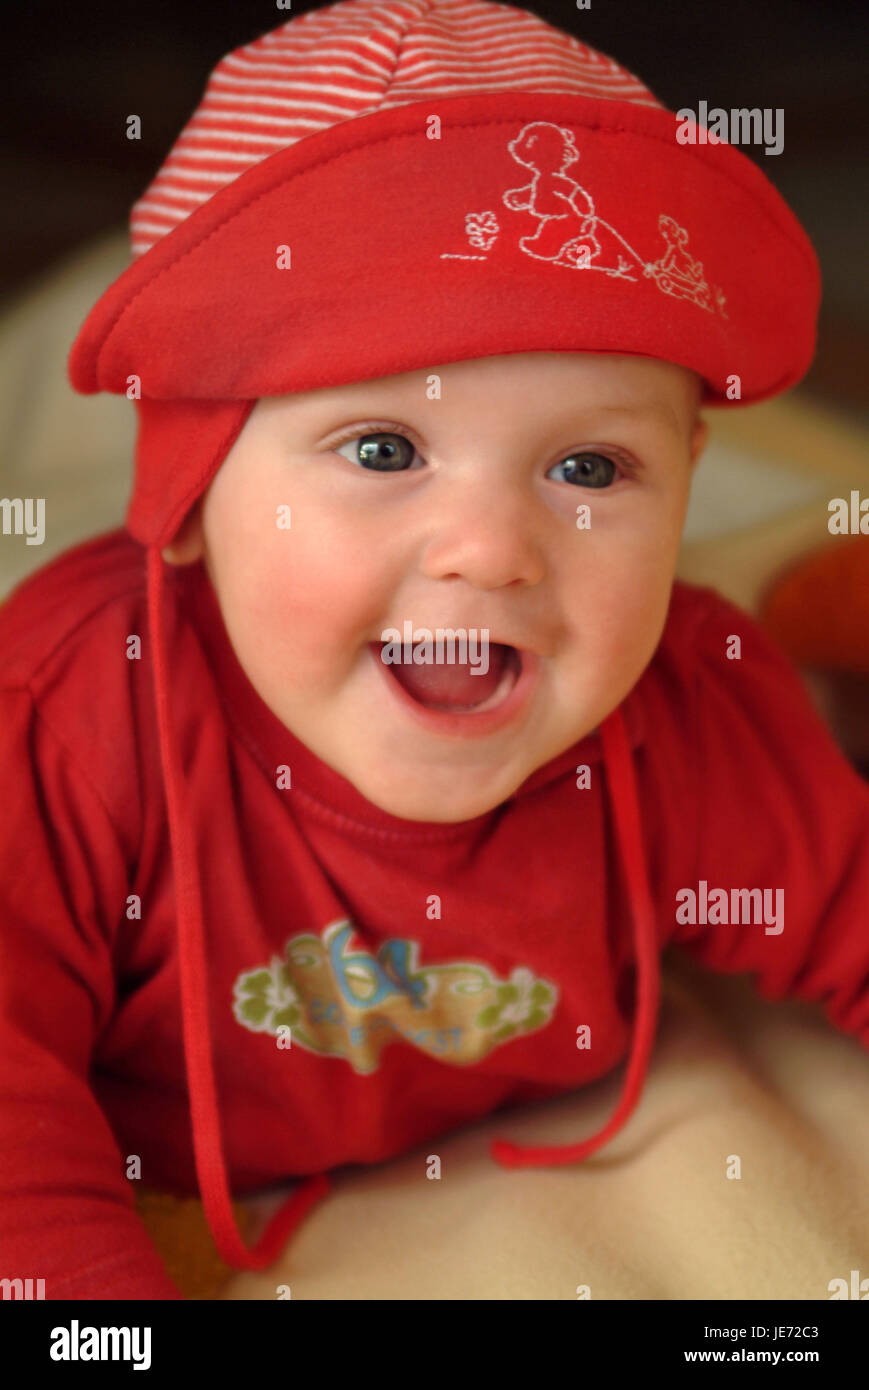 6 Month Old Baby With Cap Laugh Portrait Stock Photo Alamy